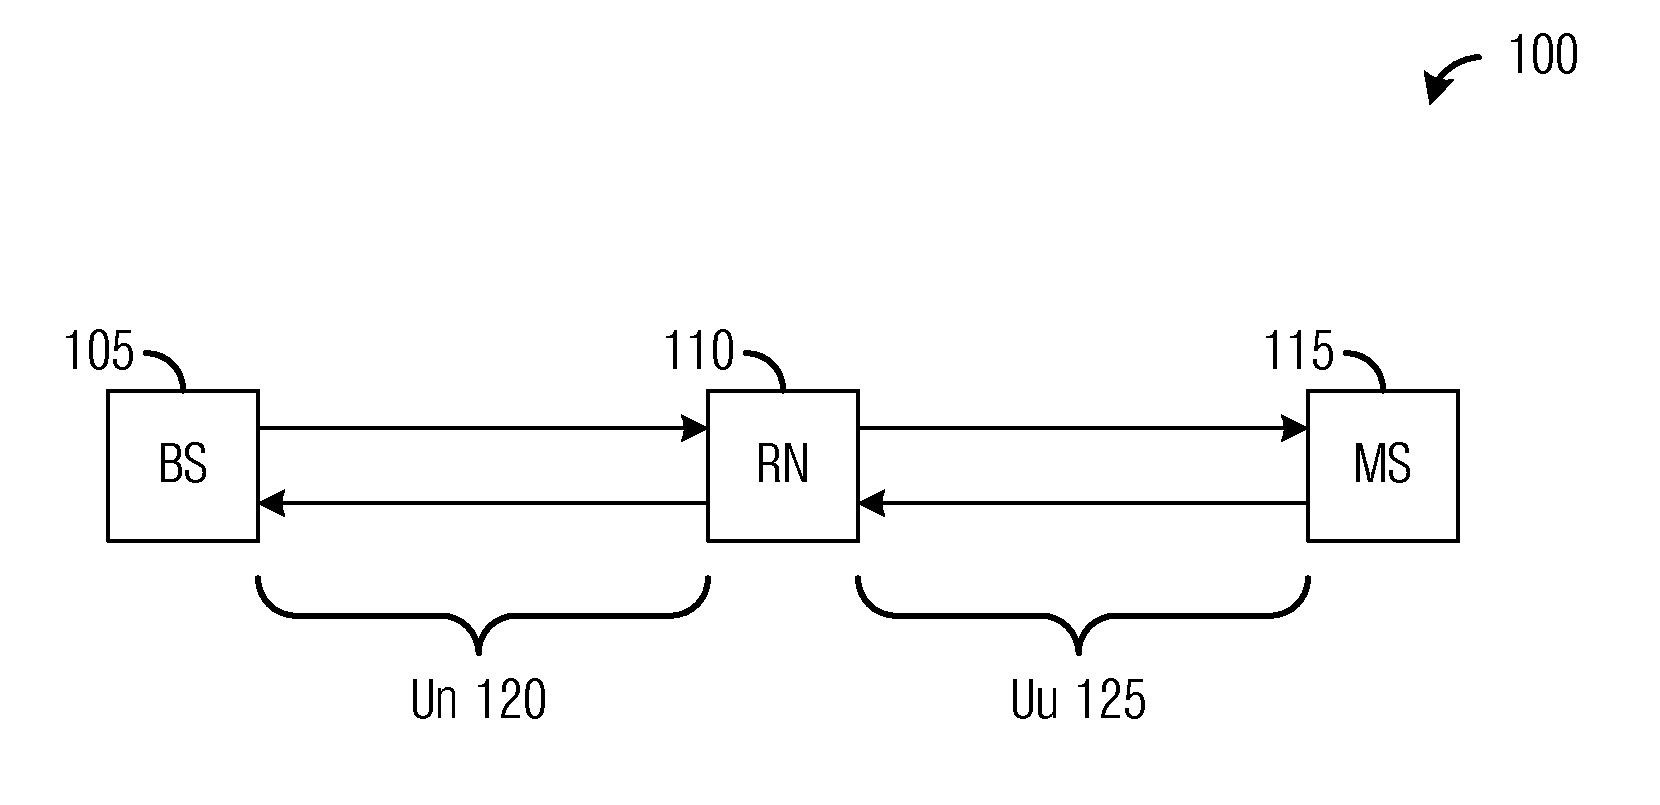 System and Method for Distributed Power Control in a Communications System